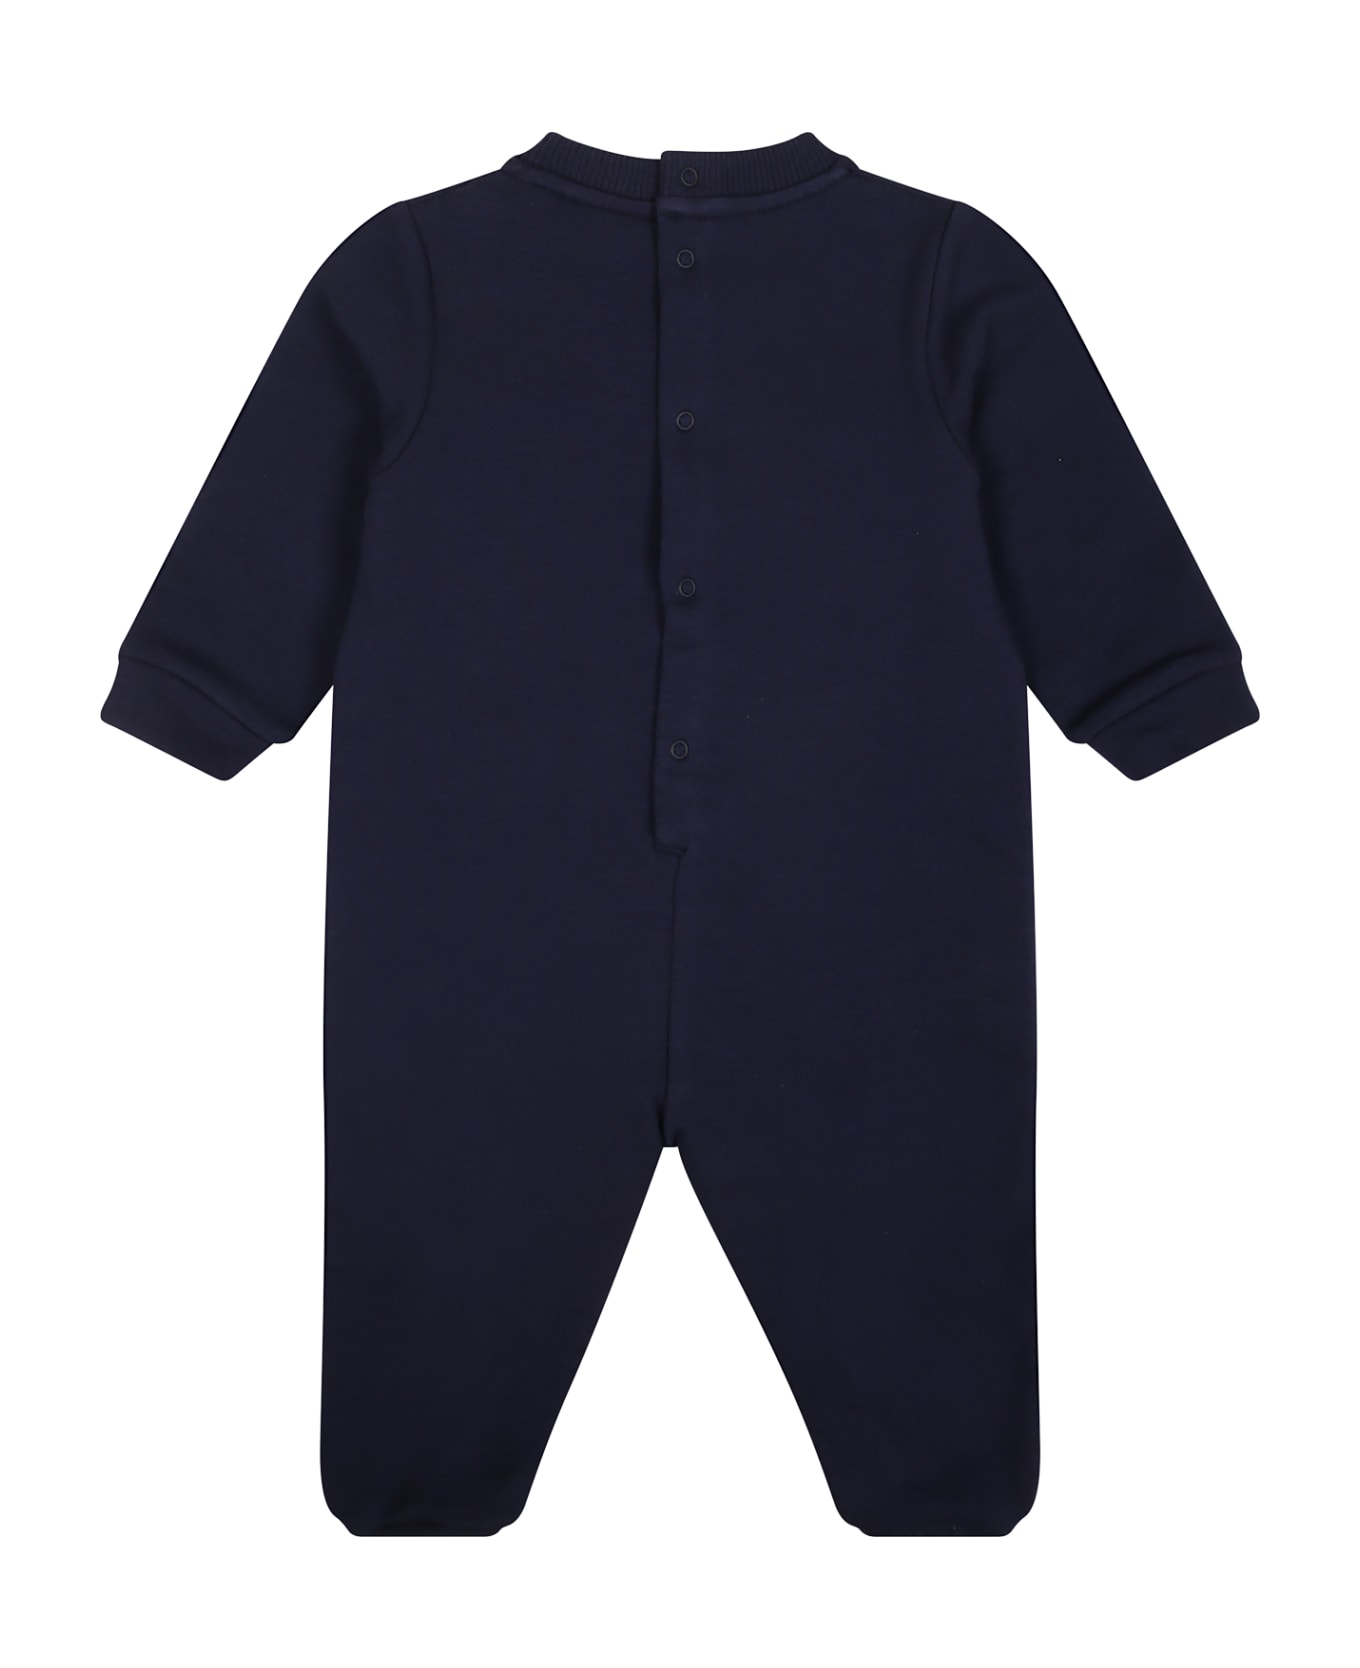 GCDS Mini Blue Baby Grow For Baby Boy With Monster And Logo - Blue ボディスーツ＆セットアップ